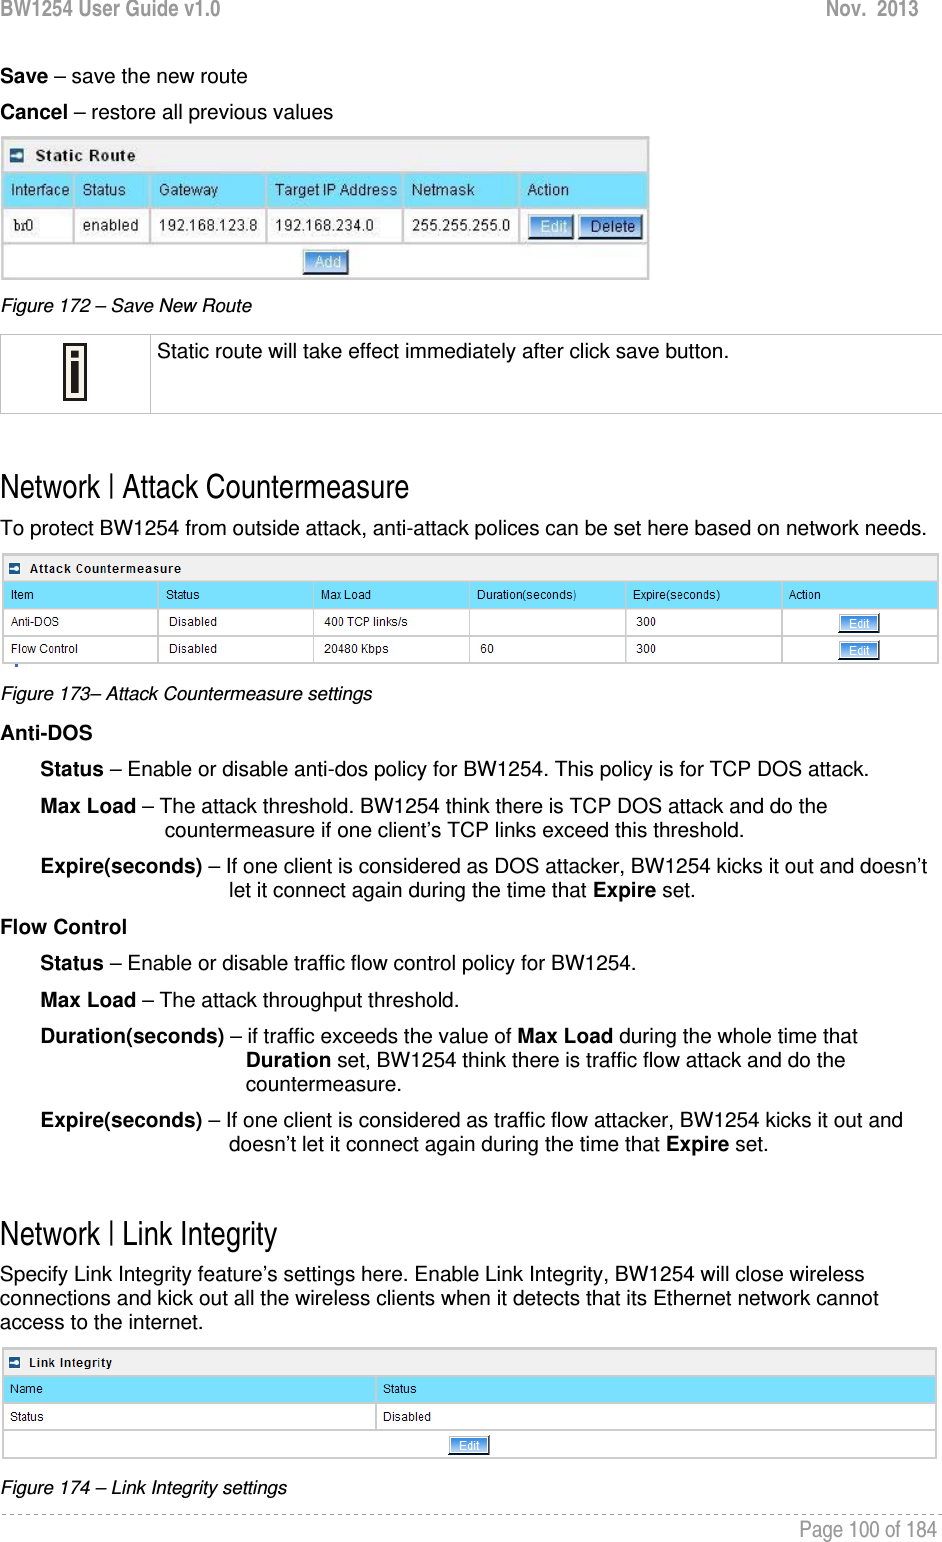 BW1254 User Guide v1.0  Nov.  2013     Page 100 of 184   Save – save the new route Cancel – restore all previous values  Figure 172 – Save New Route  Static route will take effect immediately after click save button.  Network | Attack Countermeasure To protect BW1254 from outside attack, anti-attack polices can be set here based on network needs.   Figure 173– Attack Countermeasure settings Anti-DOS         Status – Enable or disable anti-dos policy for BW1254. This policy is for TCP DOS attack.        Max Load – The attack threshold. BW1254 think there is TCP DOS attack and do the             countermeasure if one client’s TCP links exceed this threshold.         Expire(seconds) – If one client is considered as DOS attacker, BW1254 kicks it out and doesn’t let it connect again during the time that Expire set.  Flow Control         Status – Enable or disable traffic flow control policy for BW1254.         Max Load – The attack throughput threshold.         Duration(seconds) – if traffic exceeds the value of Max Load during the whole time that                      Duration set, BW1254 think there is traffic flow attack and do the                      countermeasure.        Expire(seconds) – If one client is considered as traffic flow attacker, BW1254 kicks it out and doesn’t let it connect again during the time that Expire set.   Network | Link Integrity Specify Link Integrity feature’s settings here. Enable Link Integrity, BW1254 will close wireless connections and kick out all the wireless clients when it detects that its Ethernet network cannot access to the internet.  Figure 174 – Link Integrity settings 